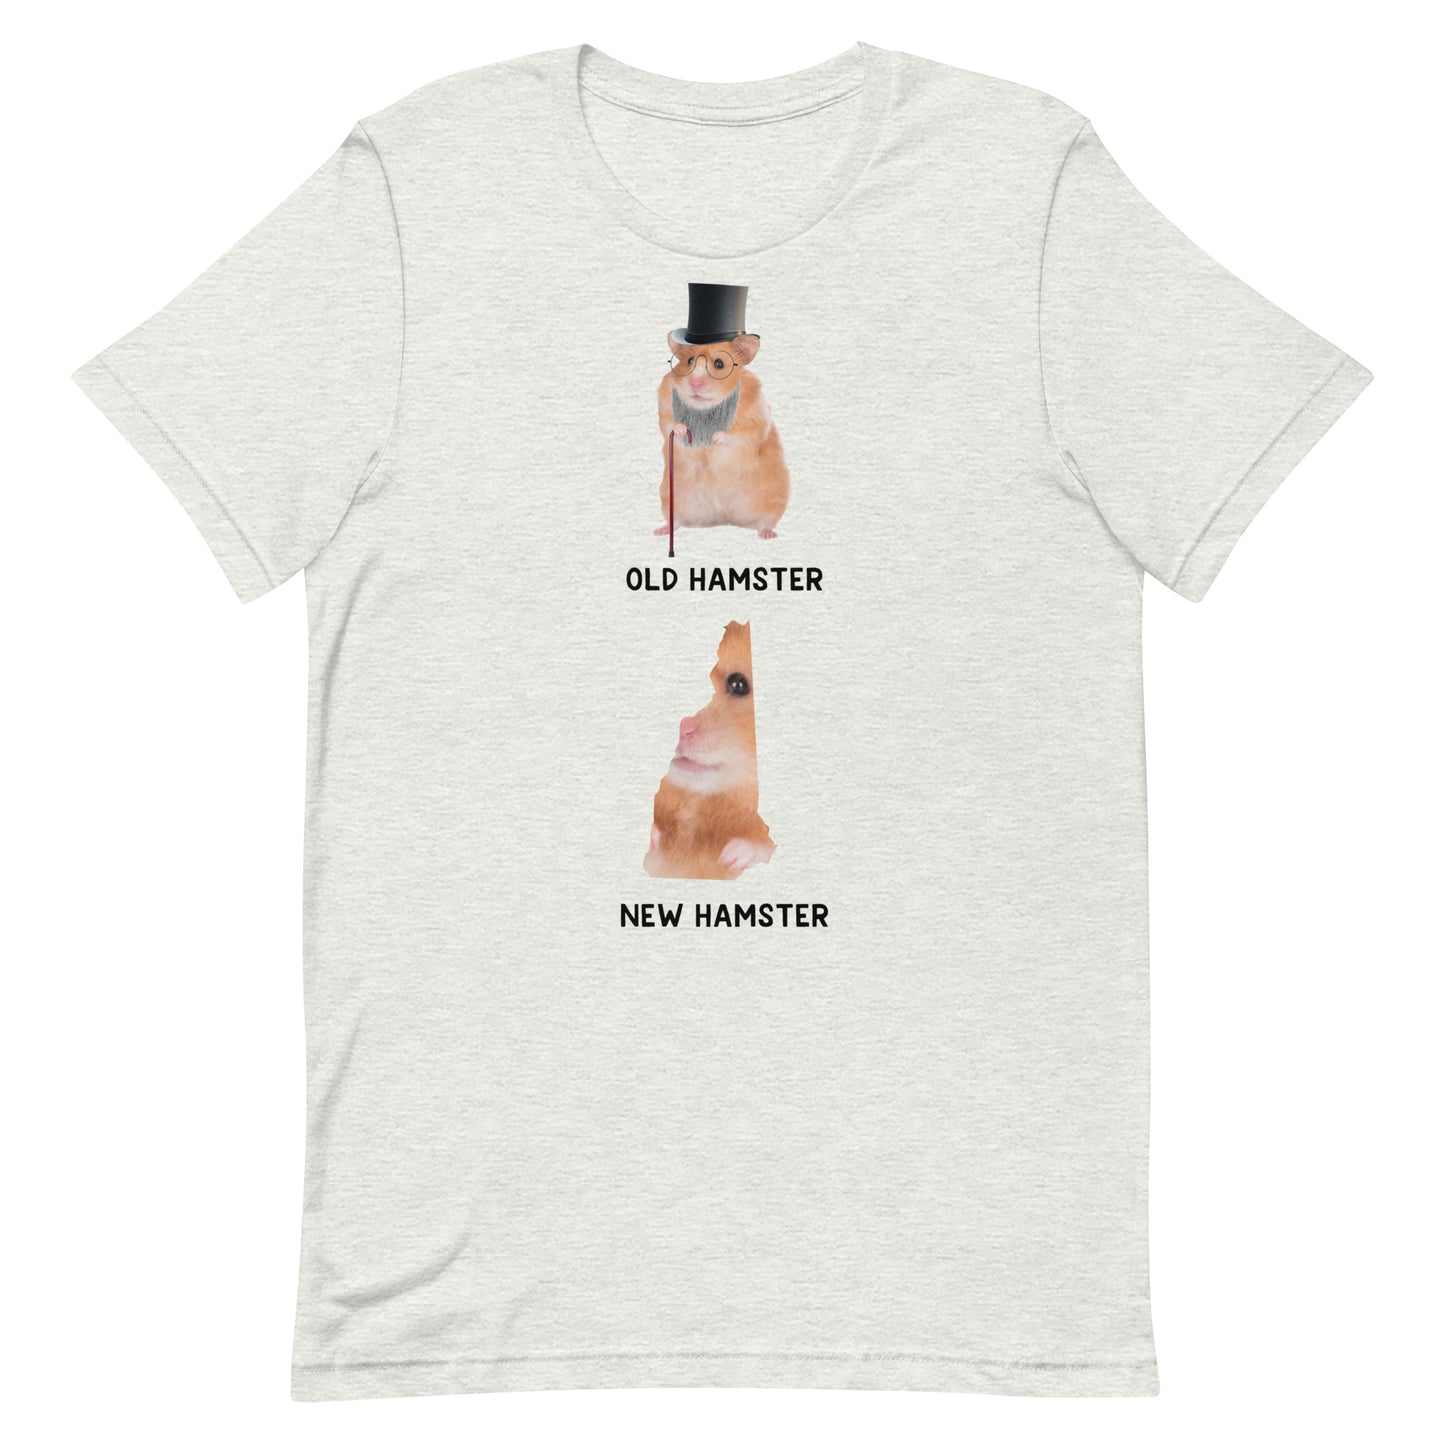 Old Hamster New Hamster (New Hampshire) Unisex t-shirt